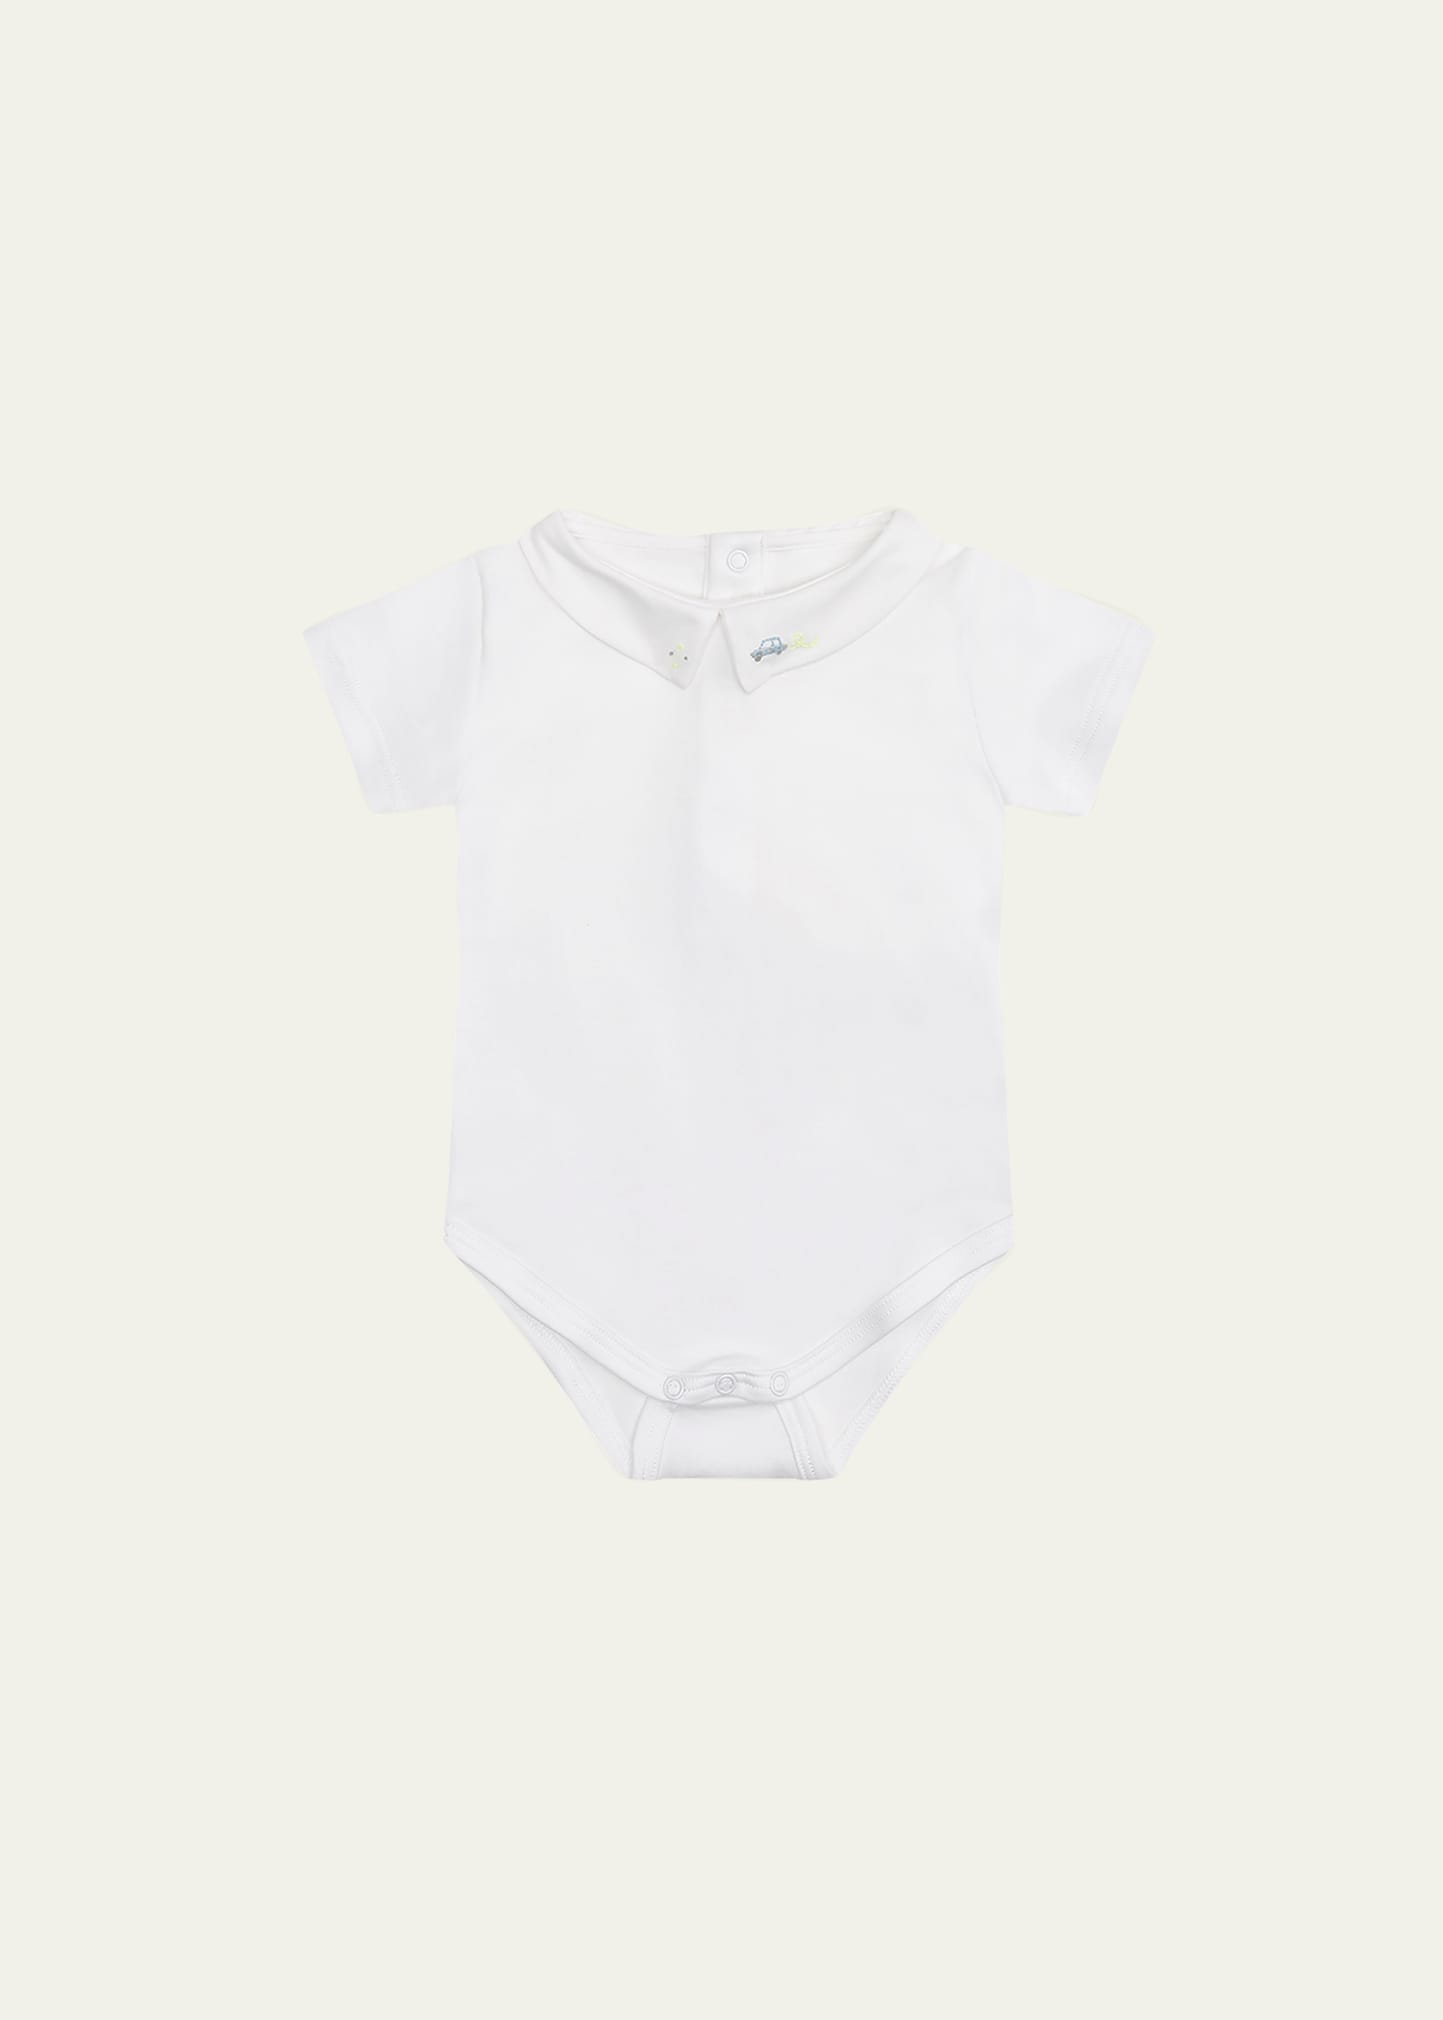 Marie Chantal Girl's Ethan Embroidered Bodysuit, Size Newborn-18M